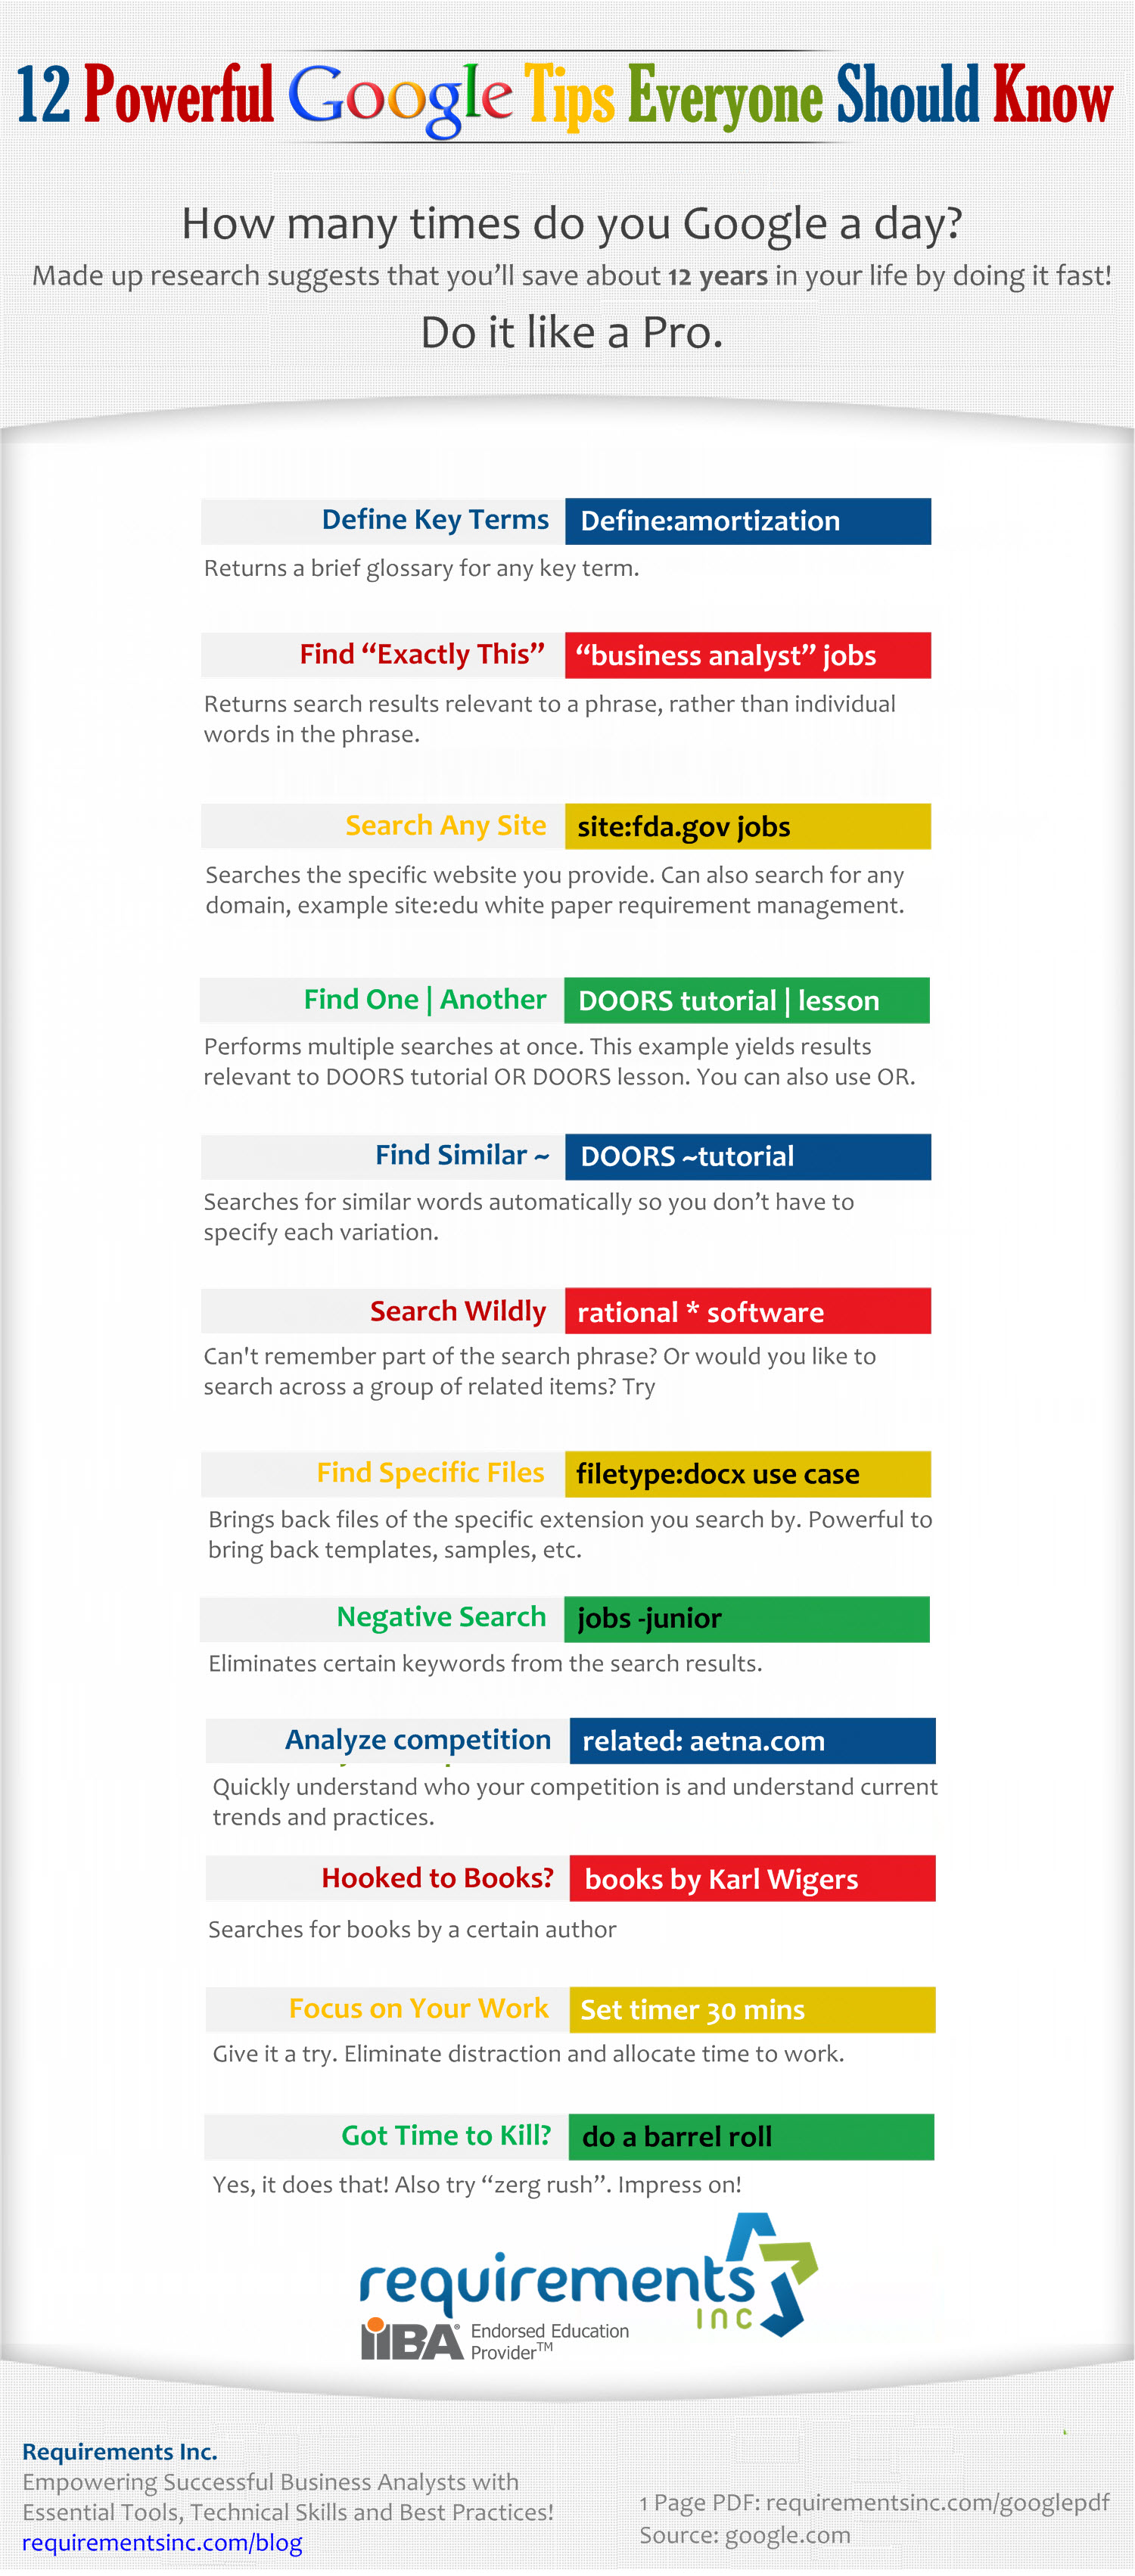 Google Tips by Requirements Inc.